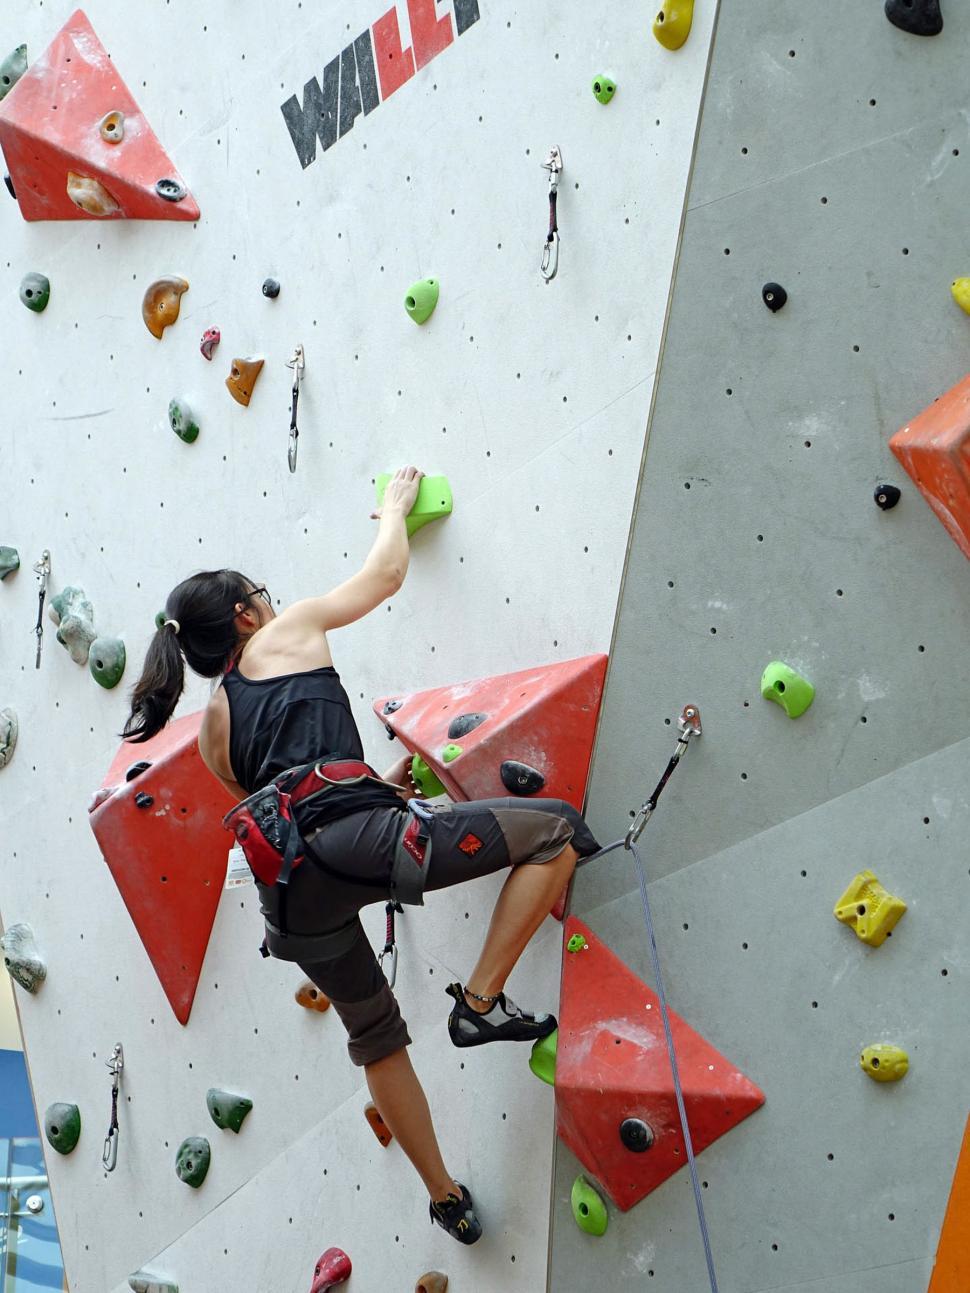 Free Image of Woman Climbing Up the Side of a Climbing Wall 